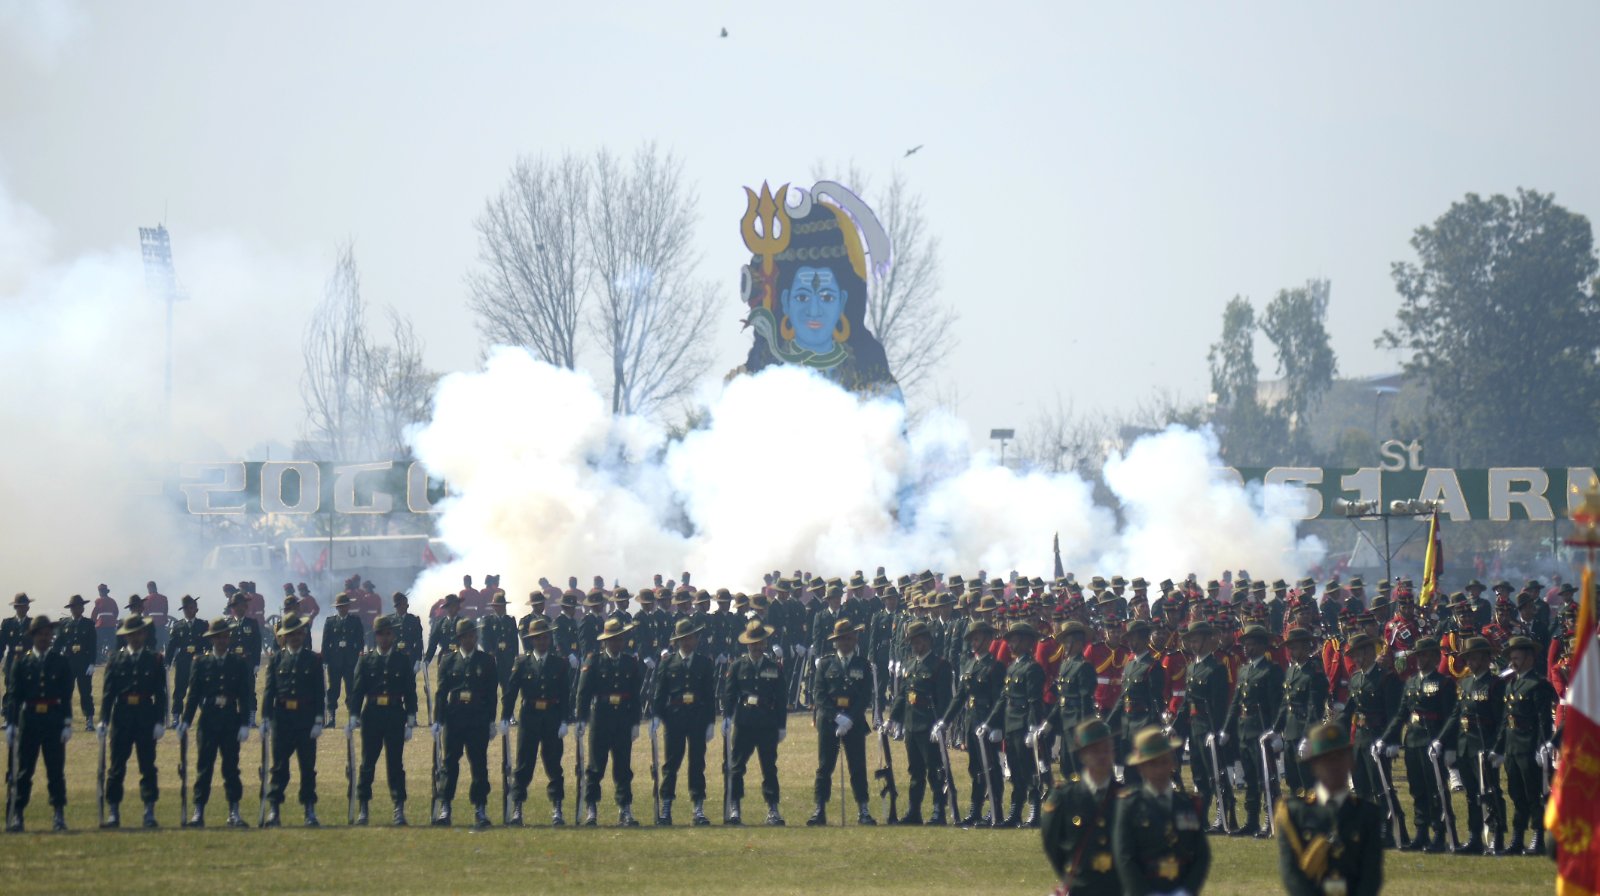 IN PICTURES: Nepal Army Day marked in Kathmandu